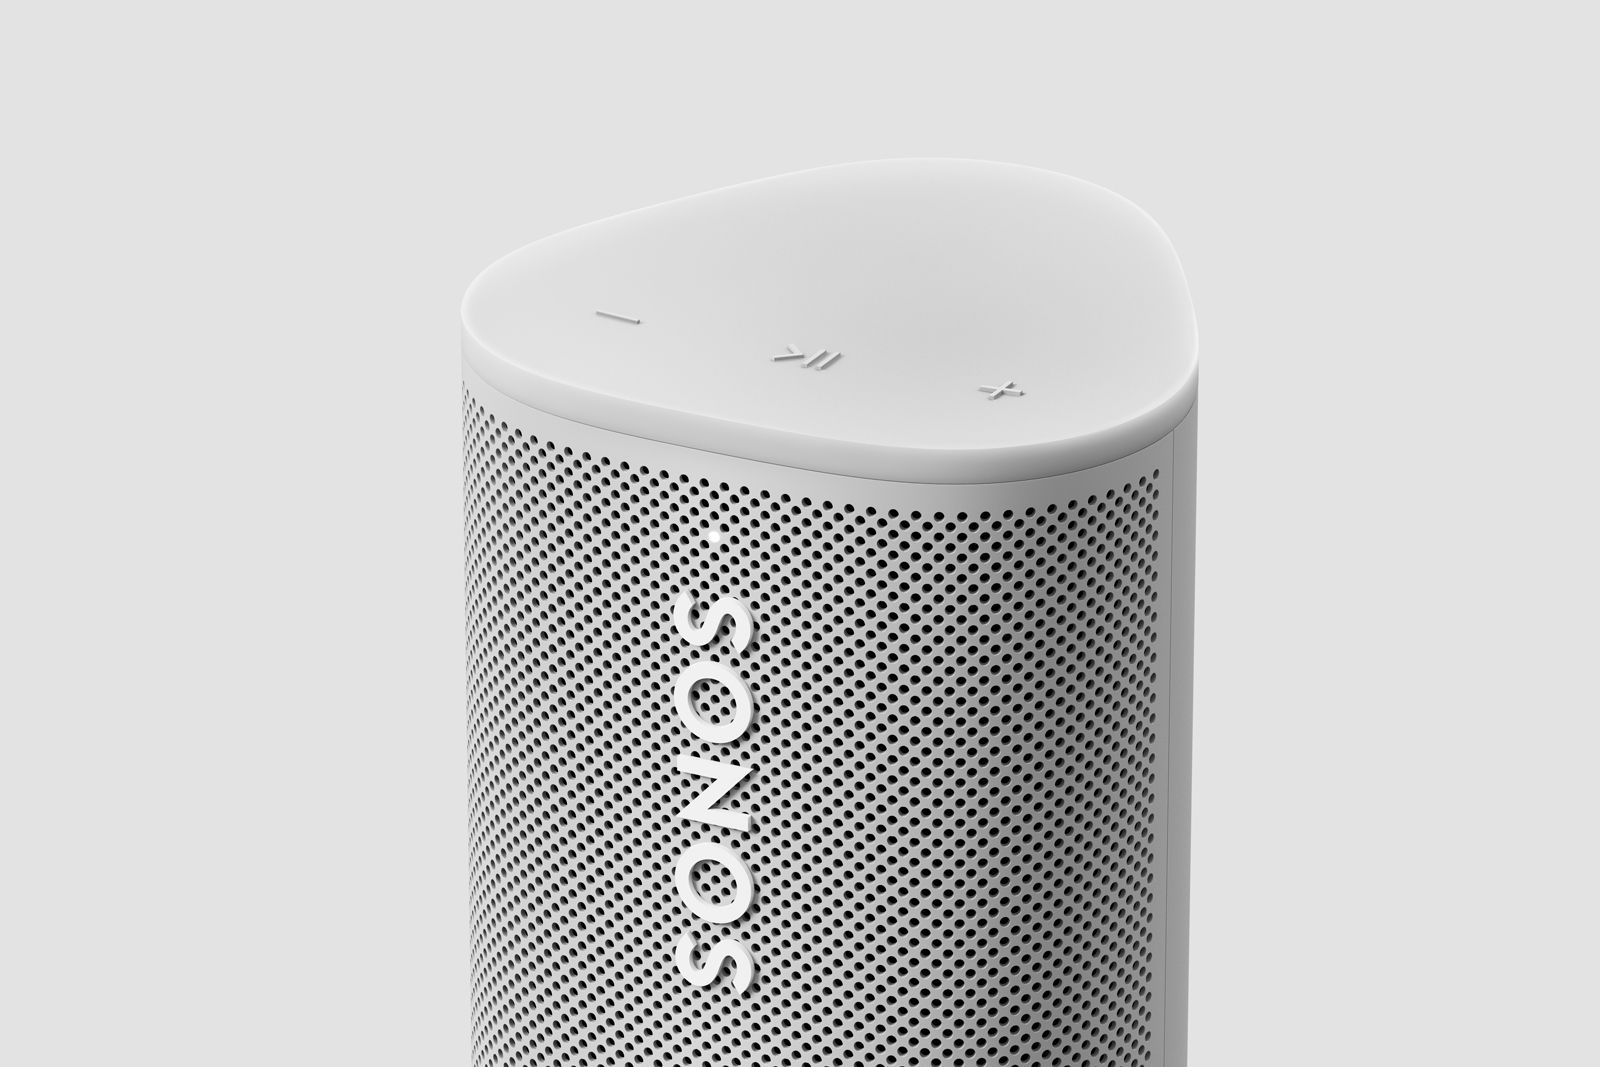 Sonos Optimo 2 will support according to FCC filing